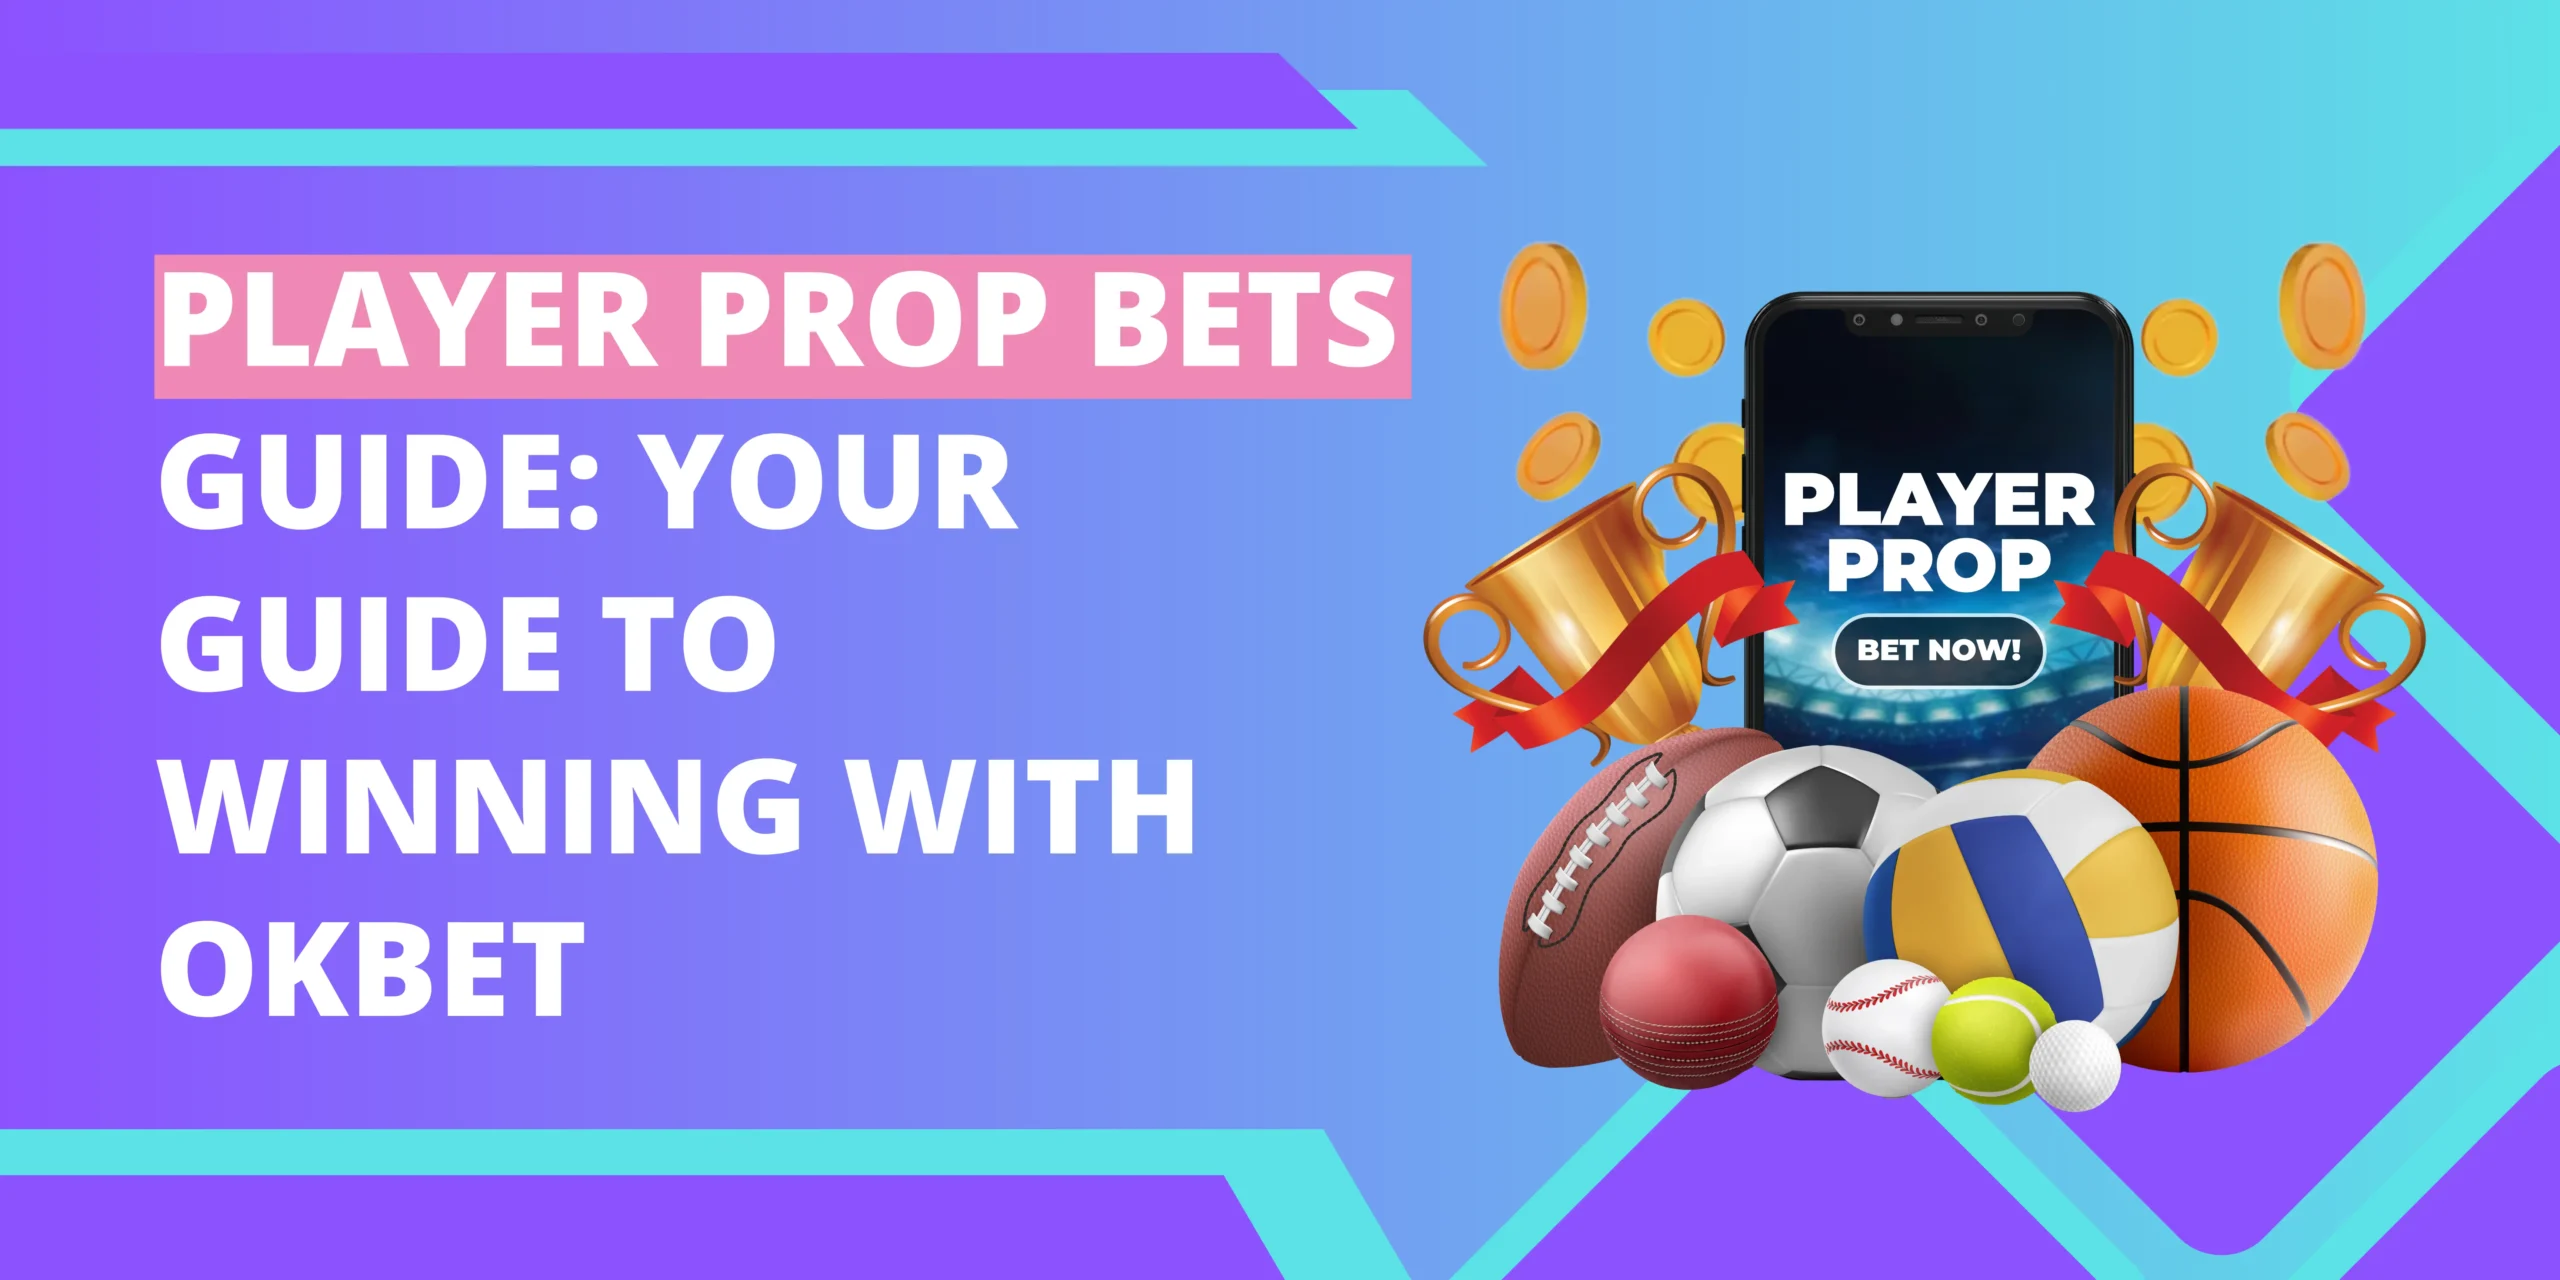 Player Prop Bets Guide Your Guide to Winning with OKBet